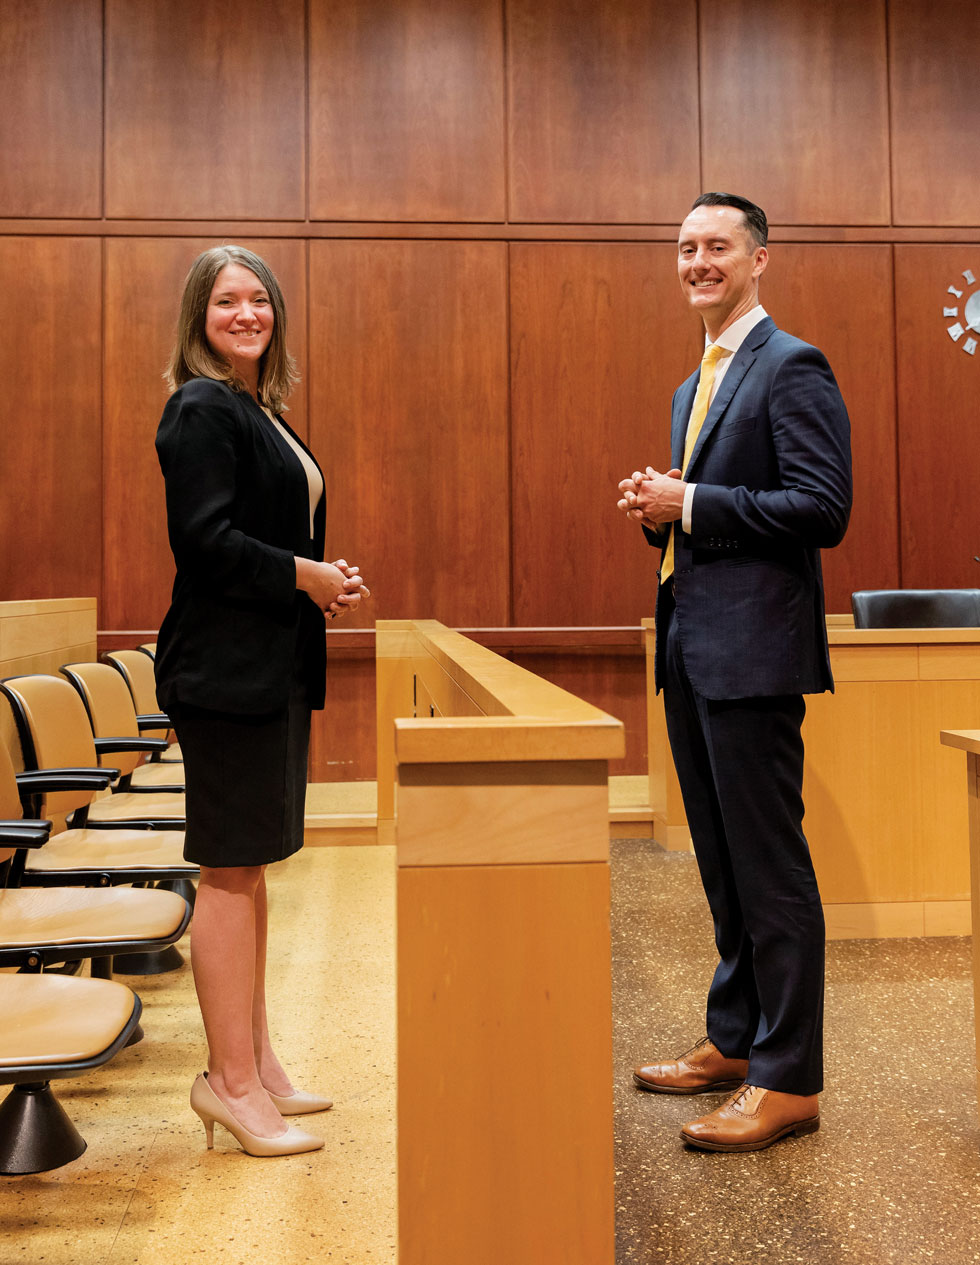 Natalie Winters and Spencer Pahlke in a courtroom